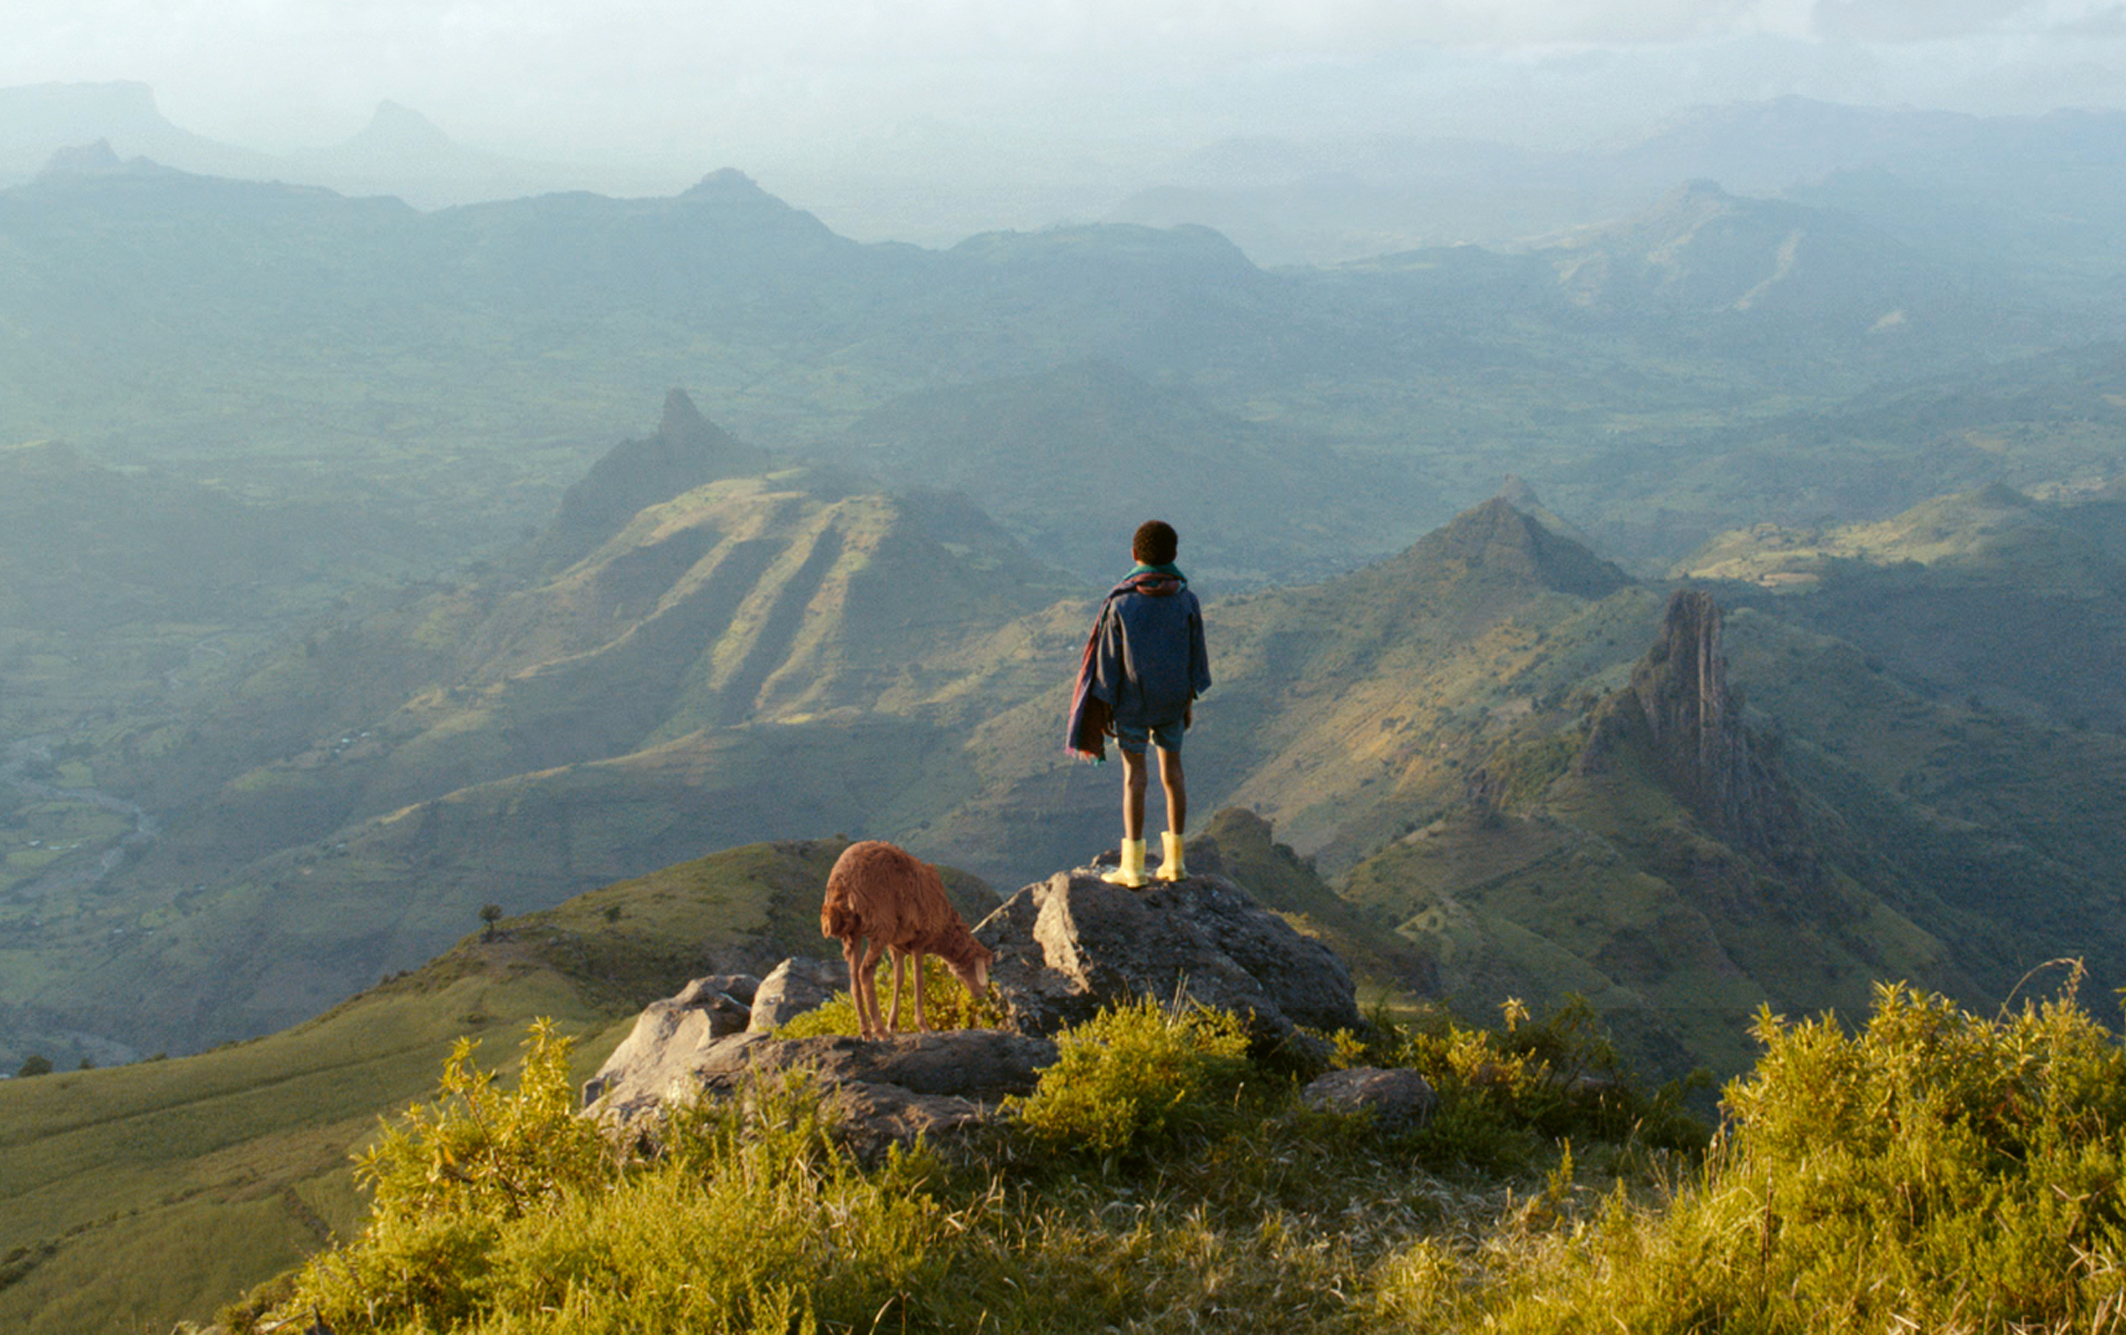 On the mountains in Ethiopia, there is a Black boy and his lamb. Photo by Kimstim Films.